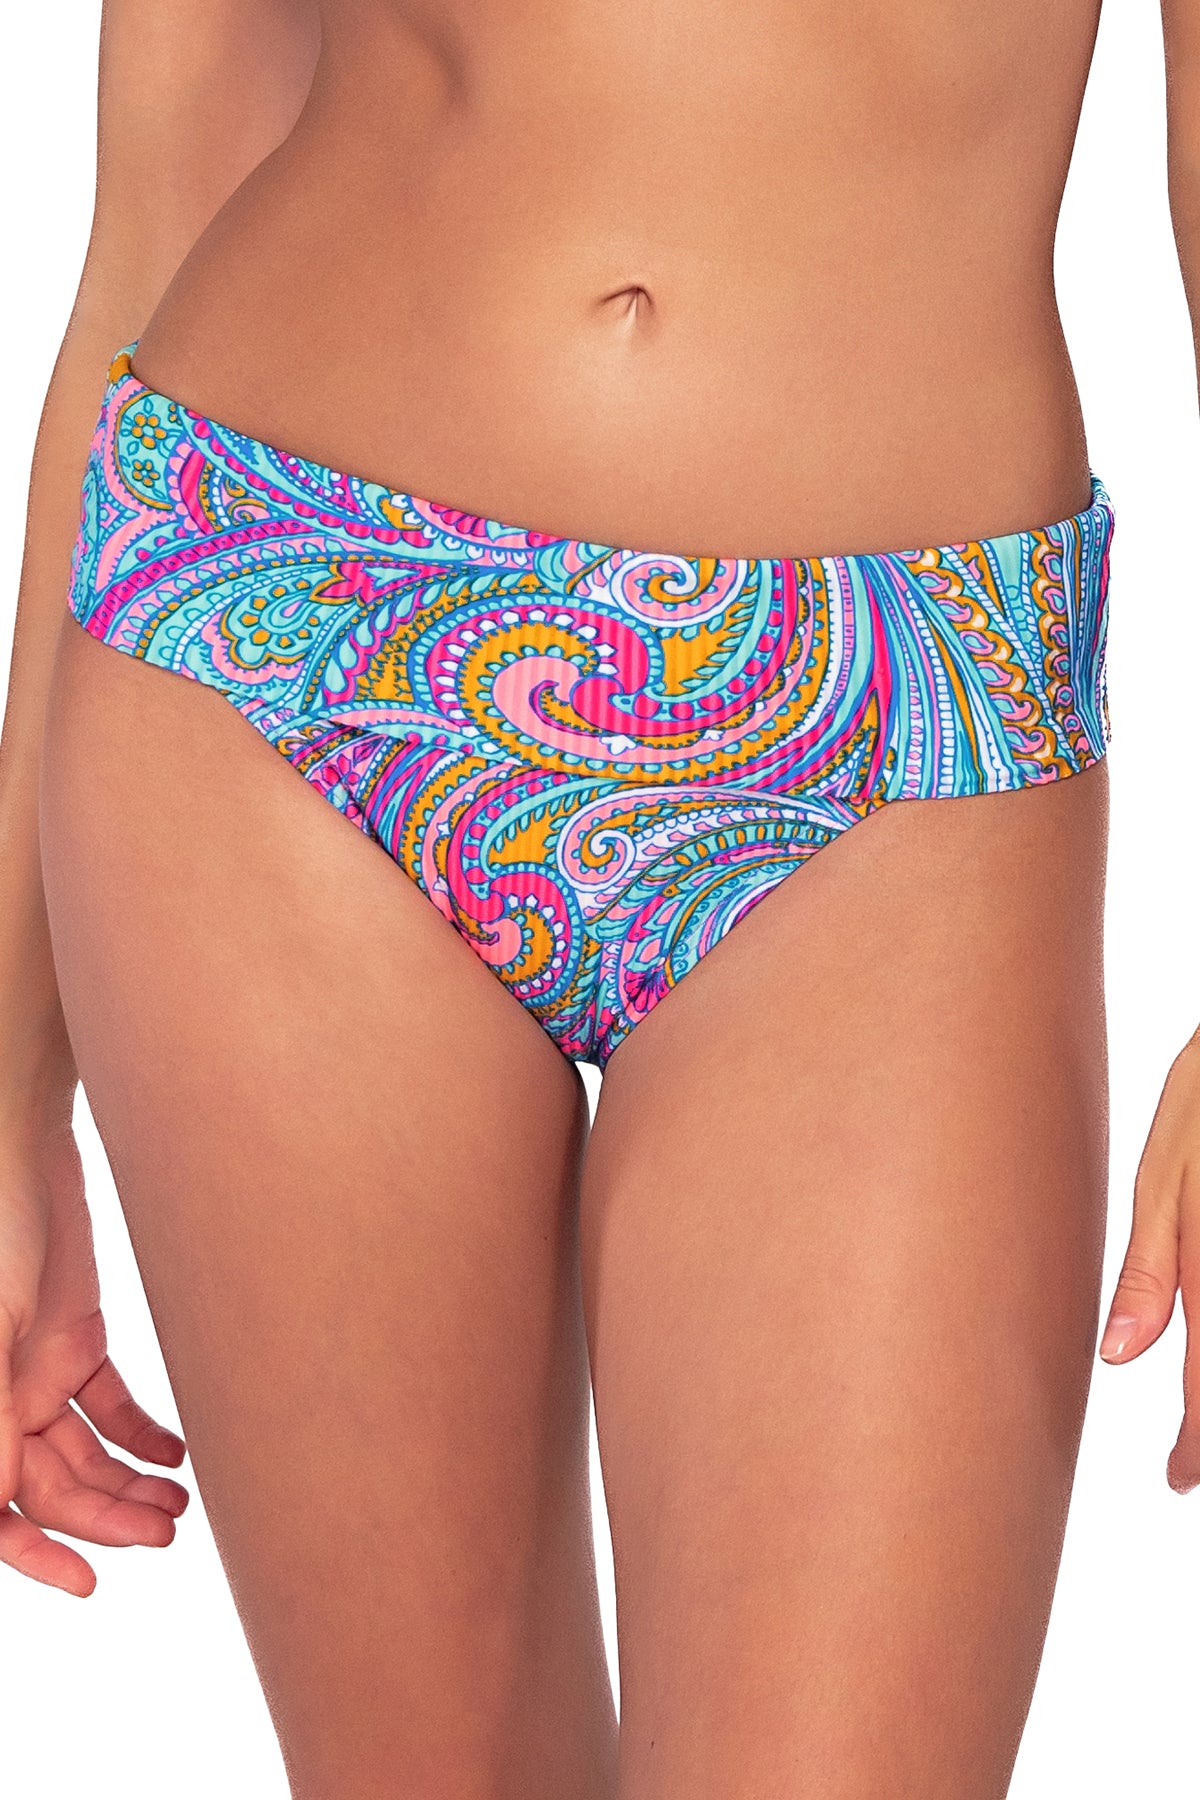 Additional front view of Sunsets Paisley Pop Hannah High Waist Bottom showing folded waist